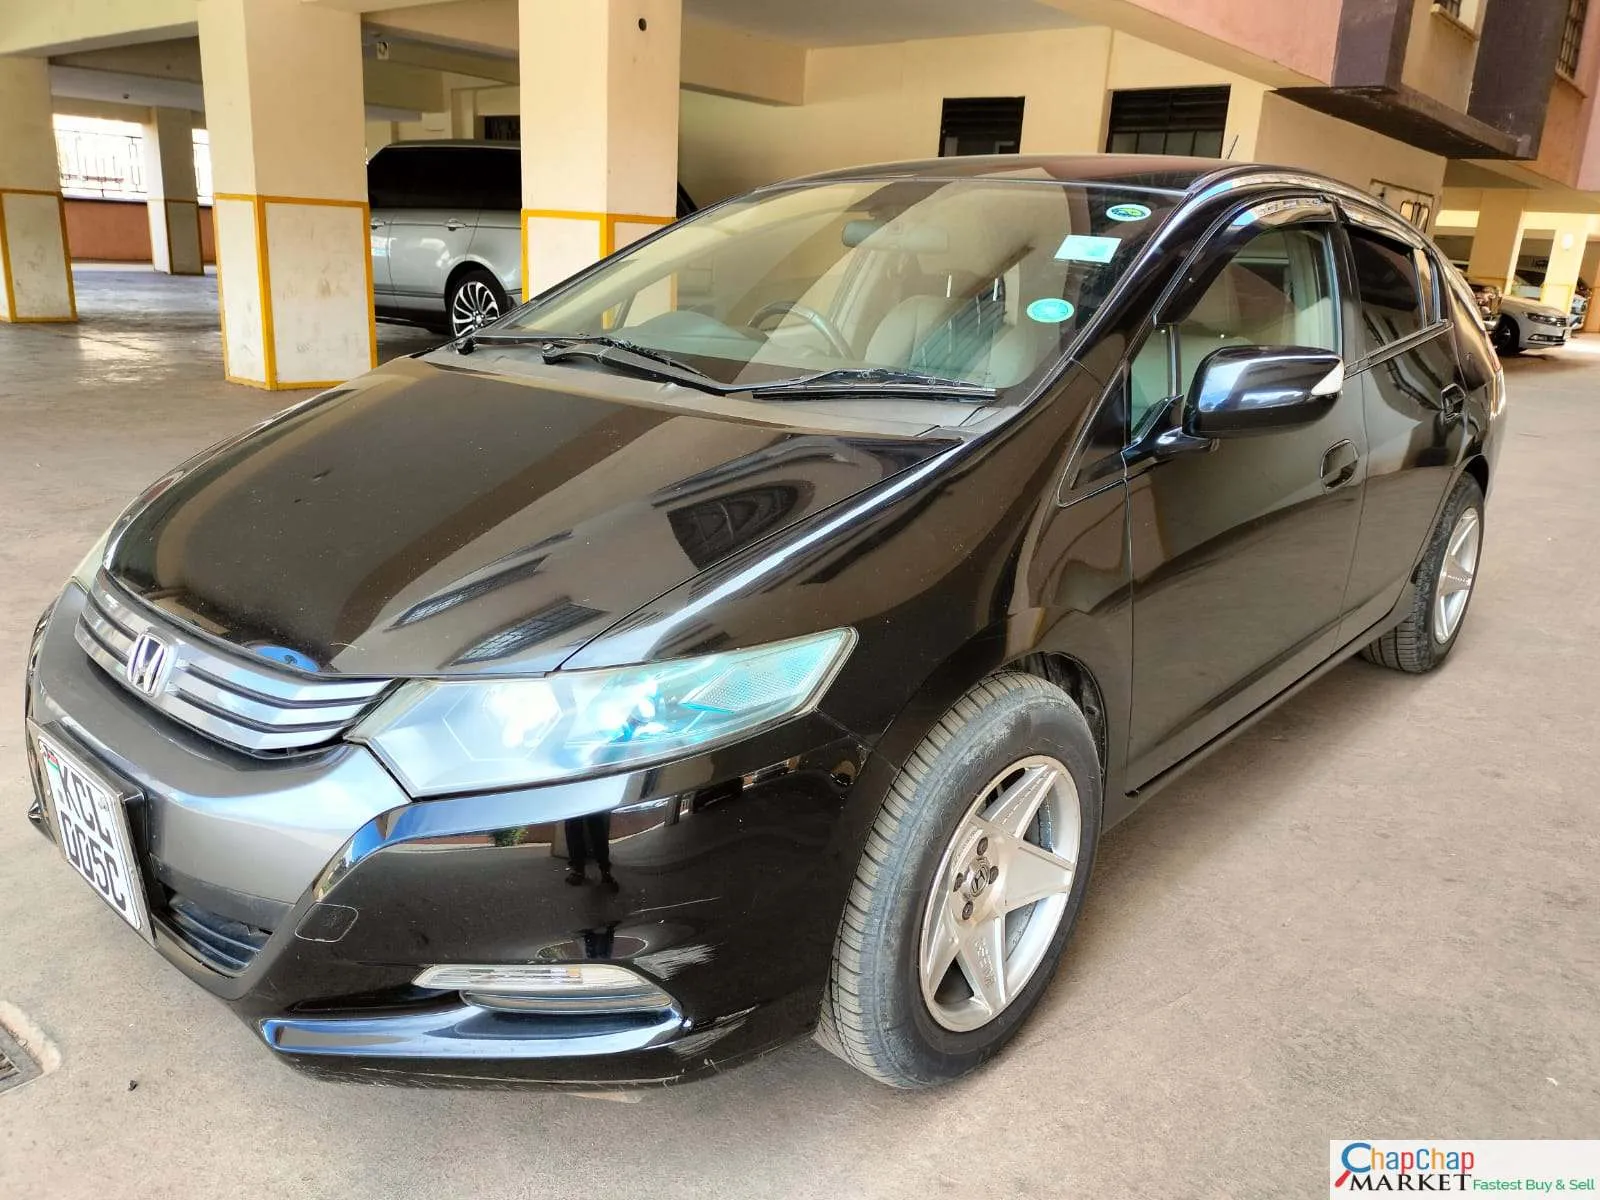 Honda insight for sale in kenya hire purchase installments You Pay 30% Deposit Trade in OK Wow